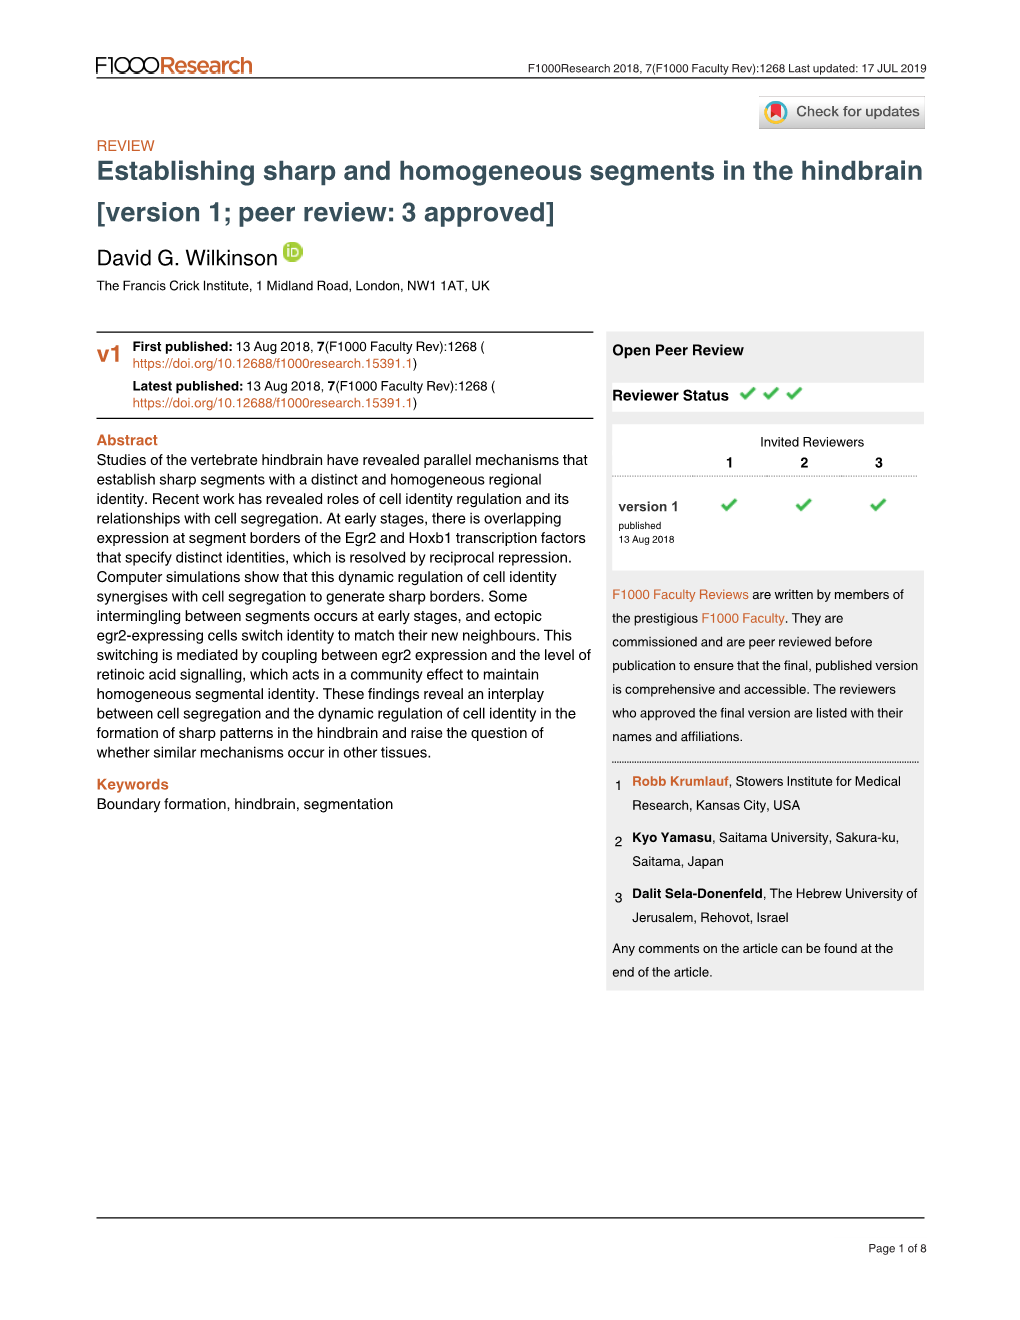 Establishing Sharp and Homogeneous Segments in the Hindbrain [Version 1; Peer Review: 3 Approved] David G